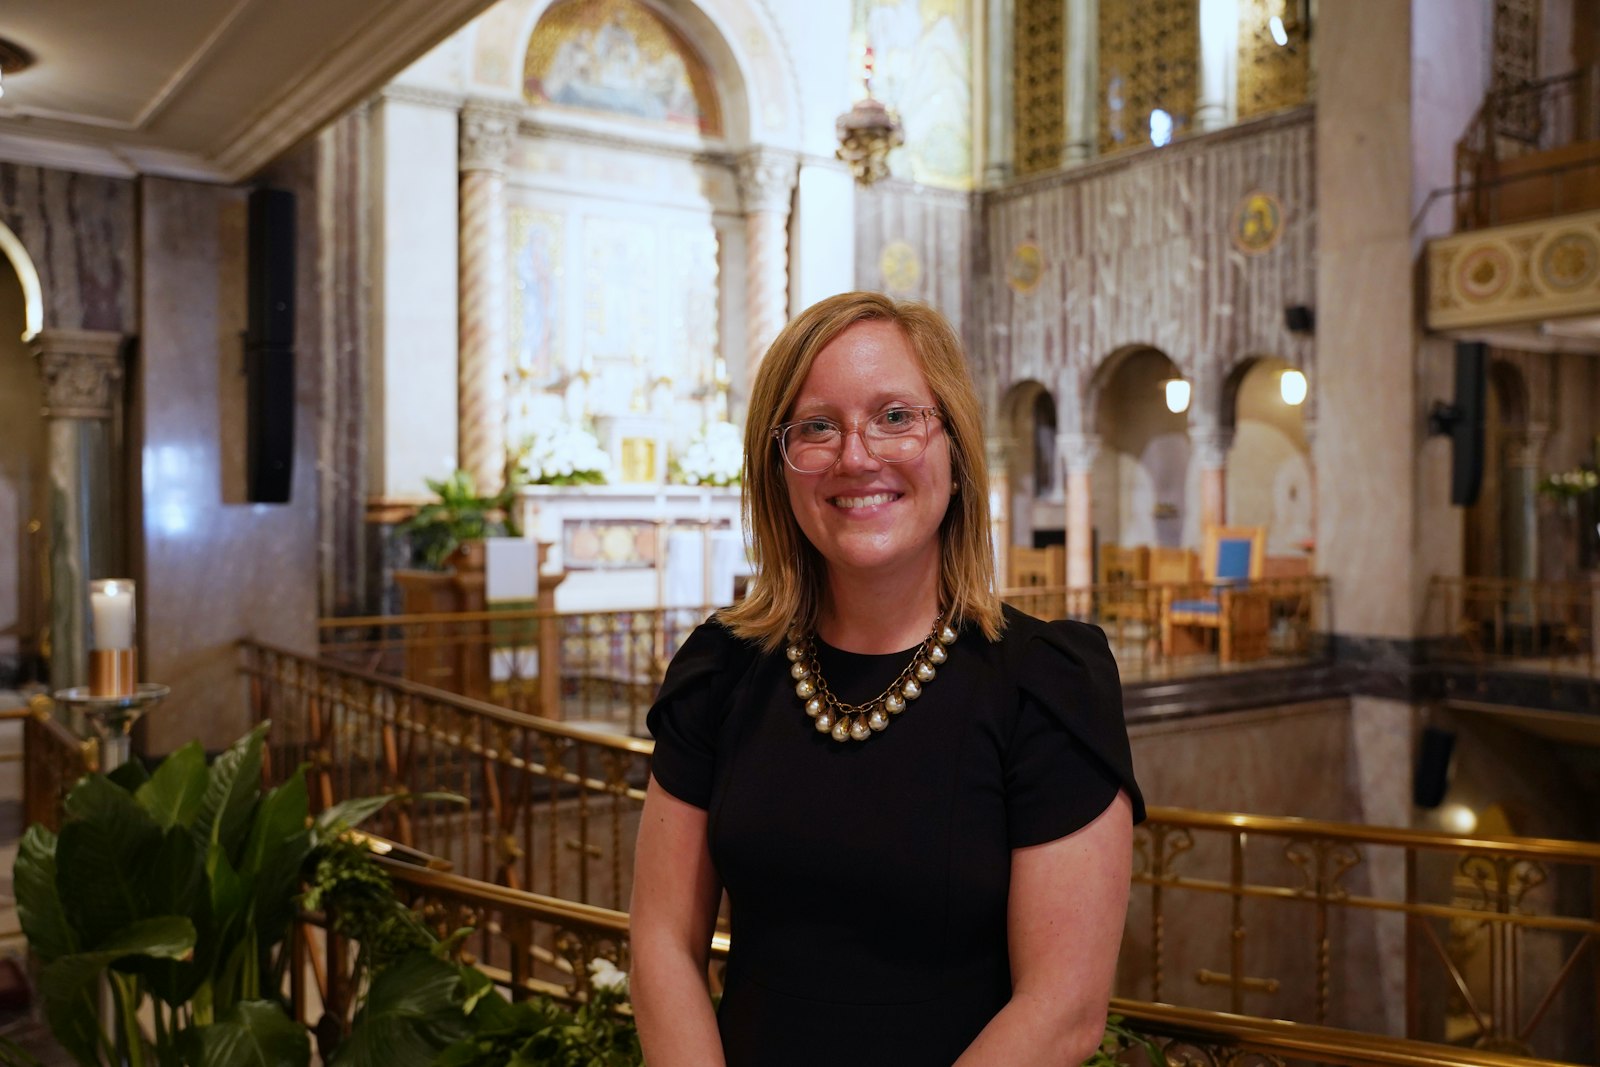 Beth Allison, parish engagement coordinator at St. Aloysius Parish, said young adults and young families have been the biggest demographic of new parishioners at St. Aloysius, a sign the parish has become a lively community in downtown Detroit.